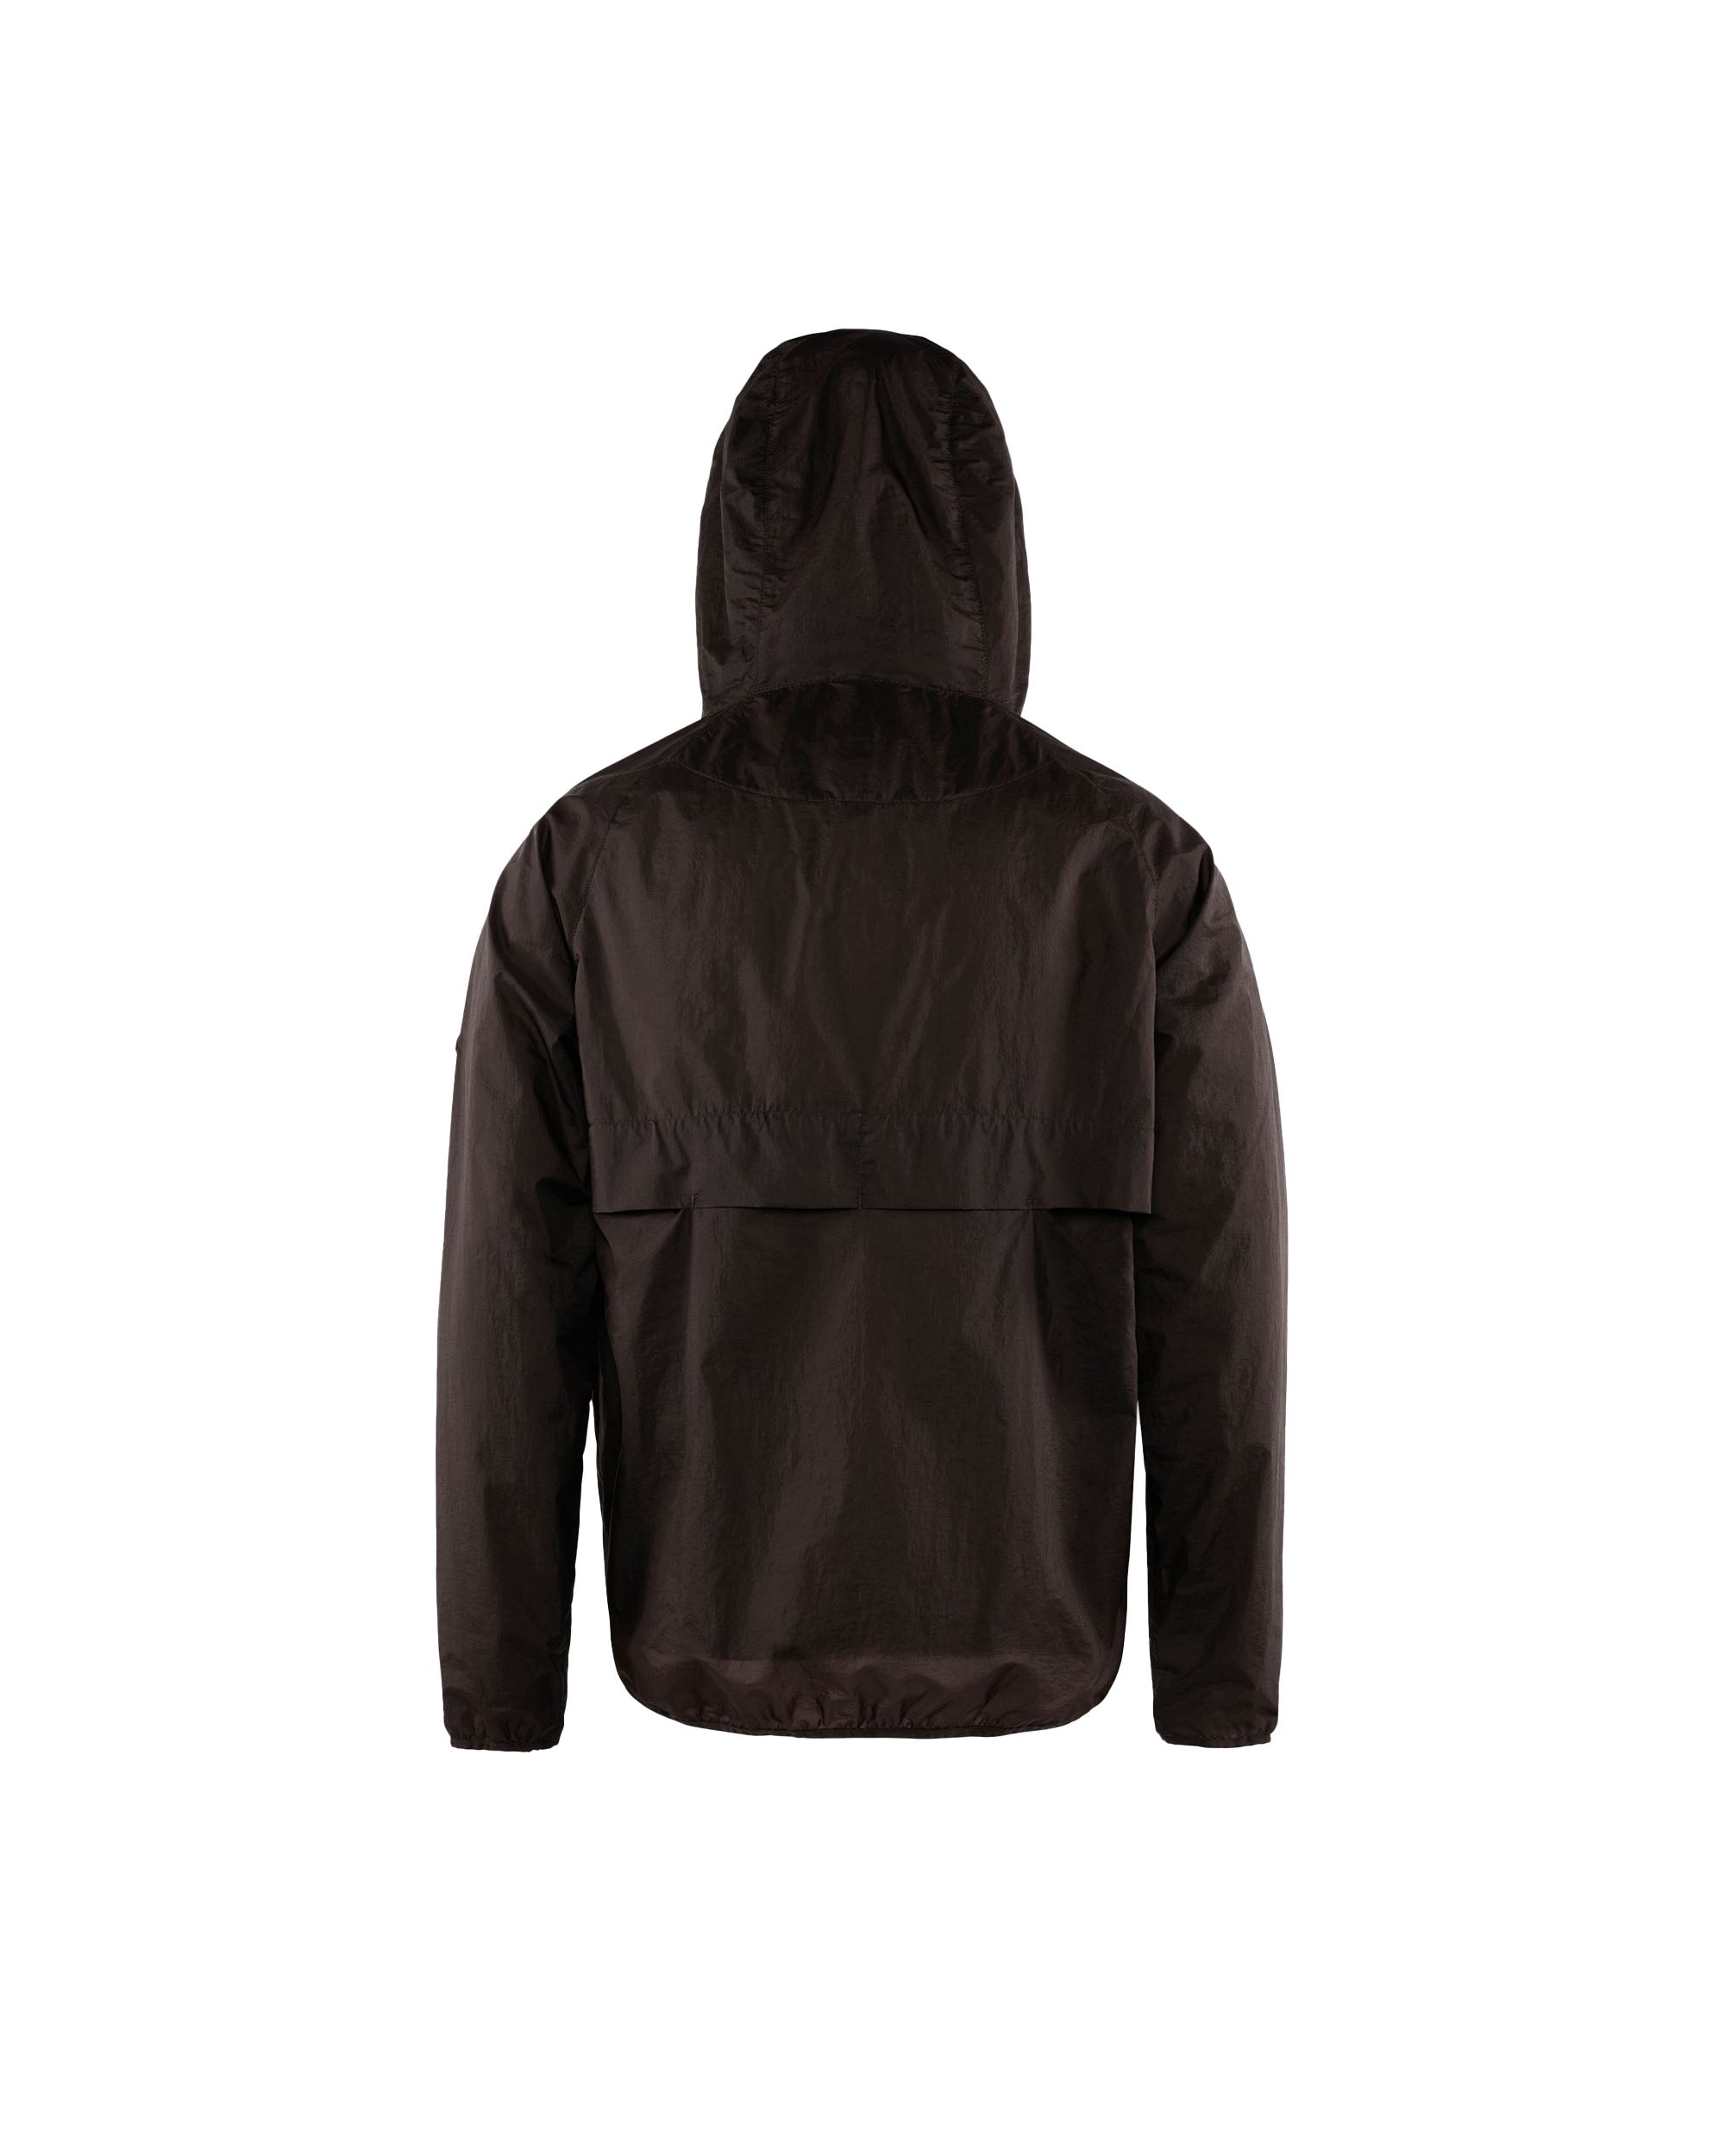 Ultralight Packable DWR Wind Jacket - Cacao